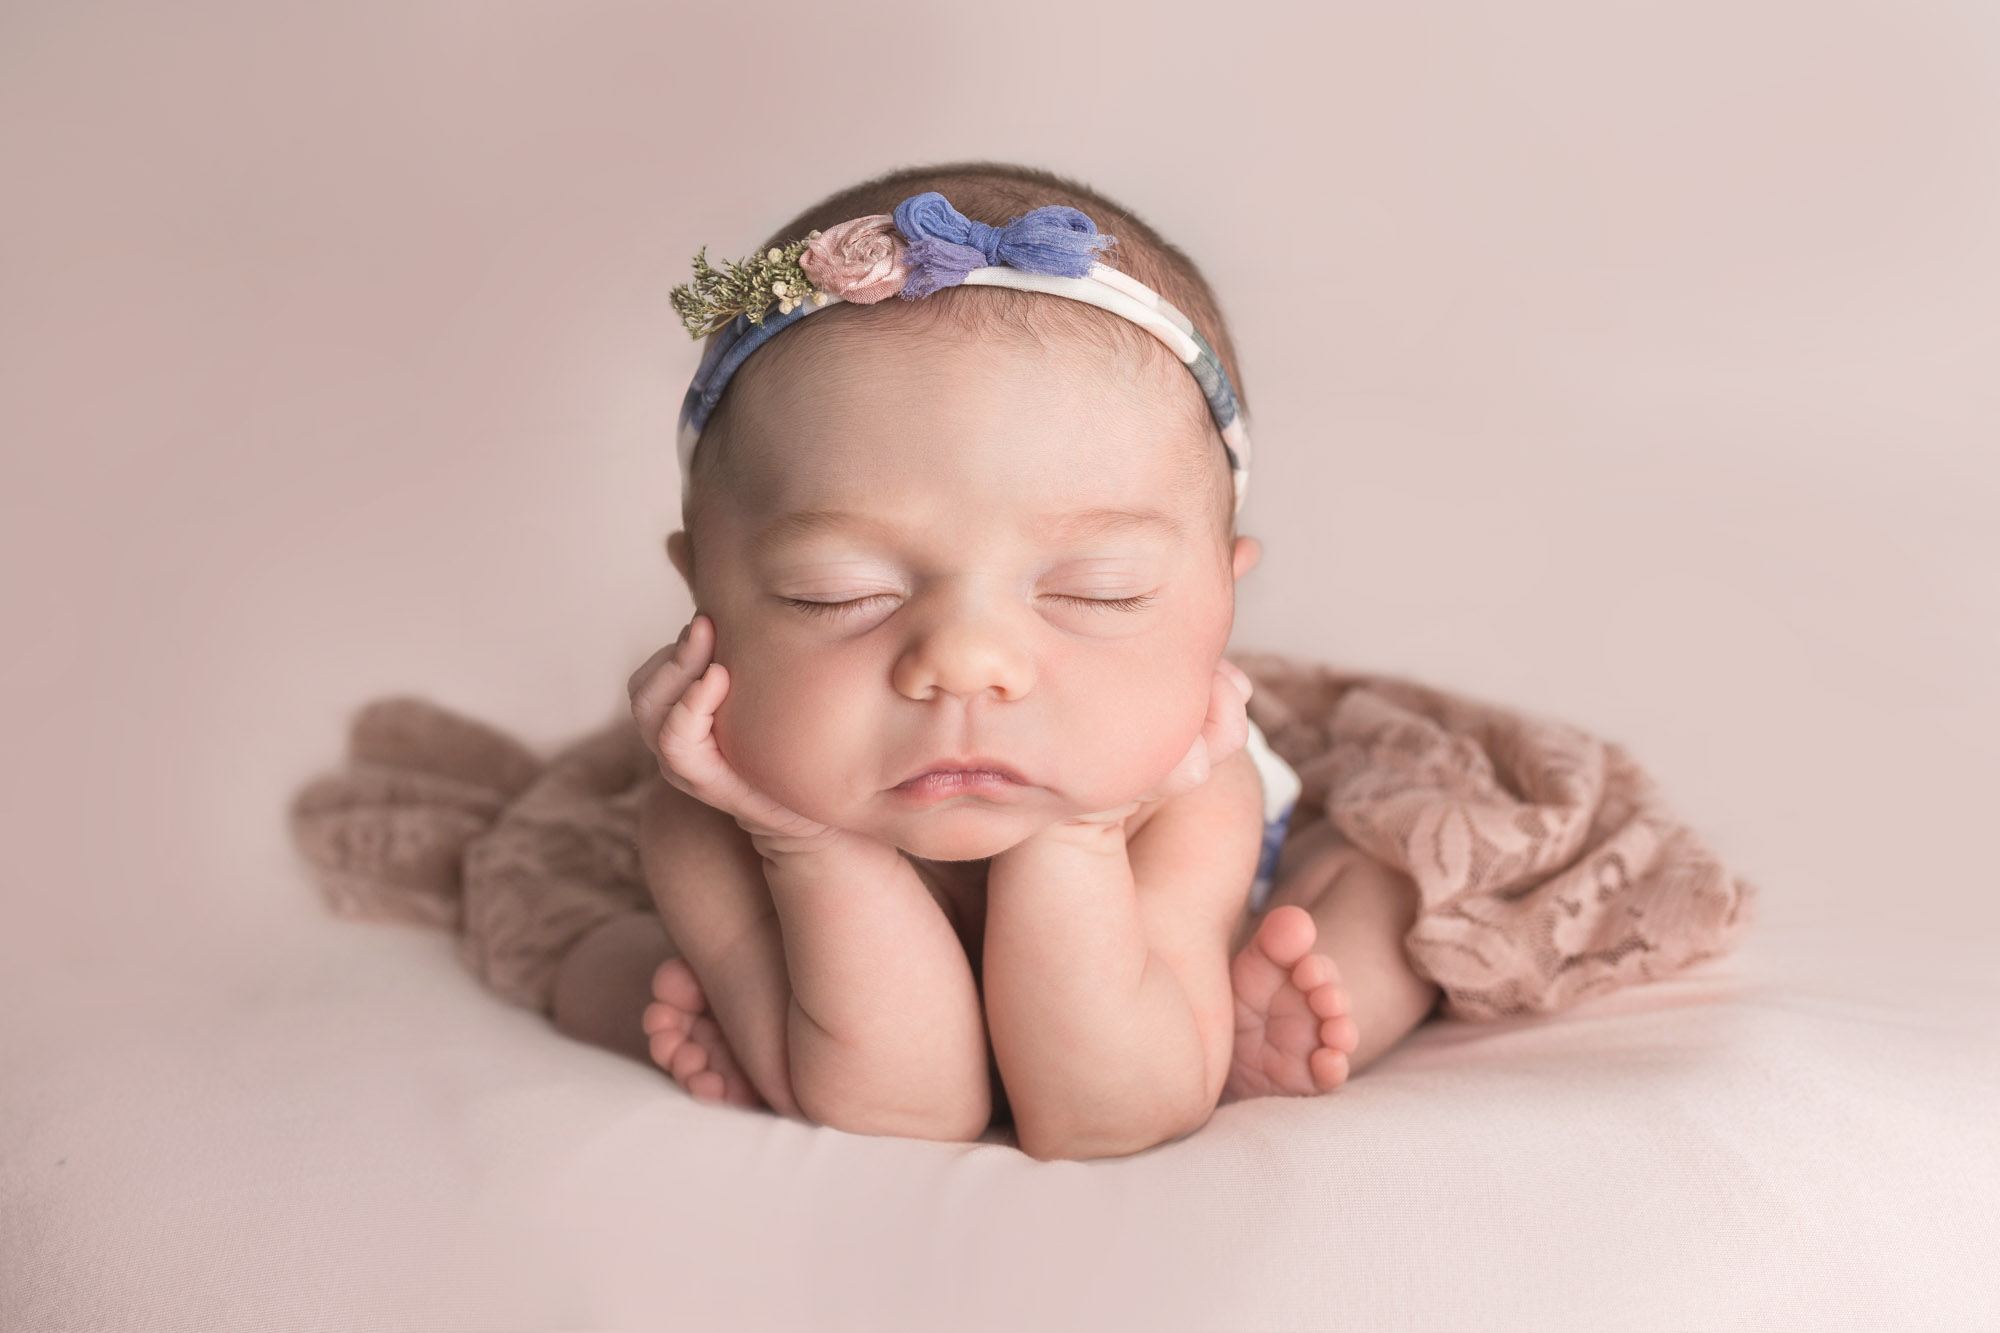 Newborn Photography Sessions | Photography By Kirsty | Kent UK